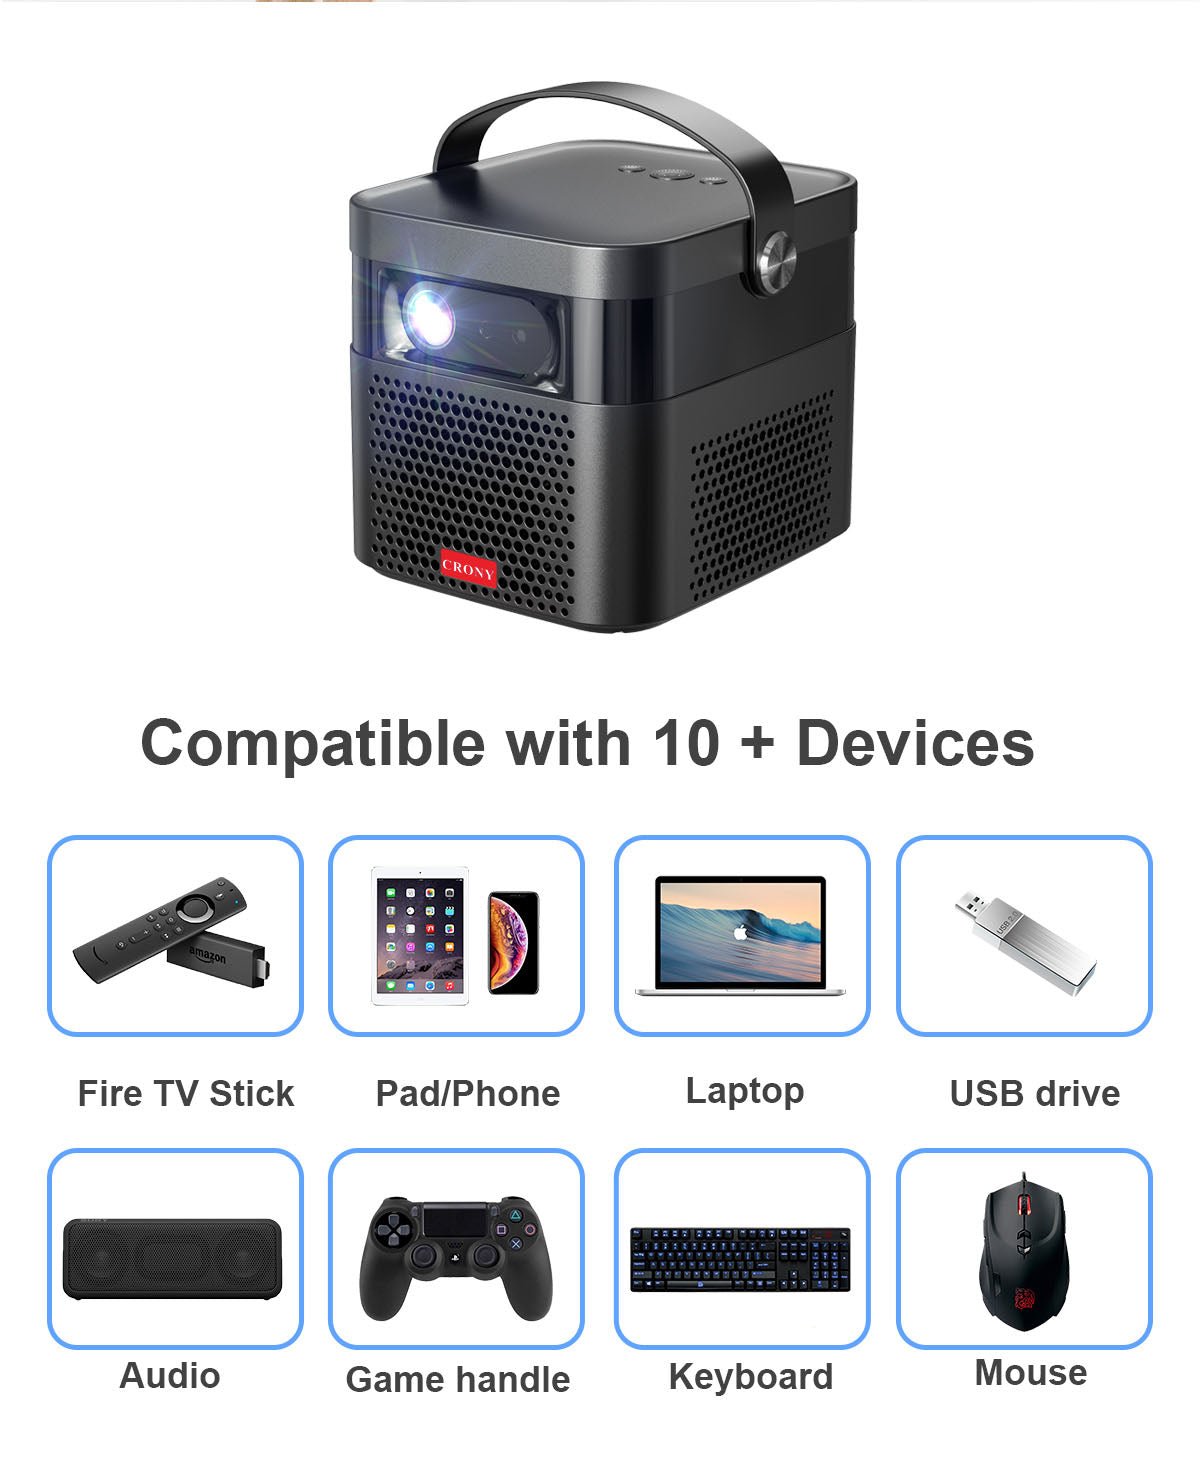 CRONY K5 upright Projector with BT speaker 3D Smart DLP Projector 800 ANSI Lumens 1080P Portable Outdoor DLP 4k Projector - Edragonmall.com